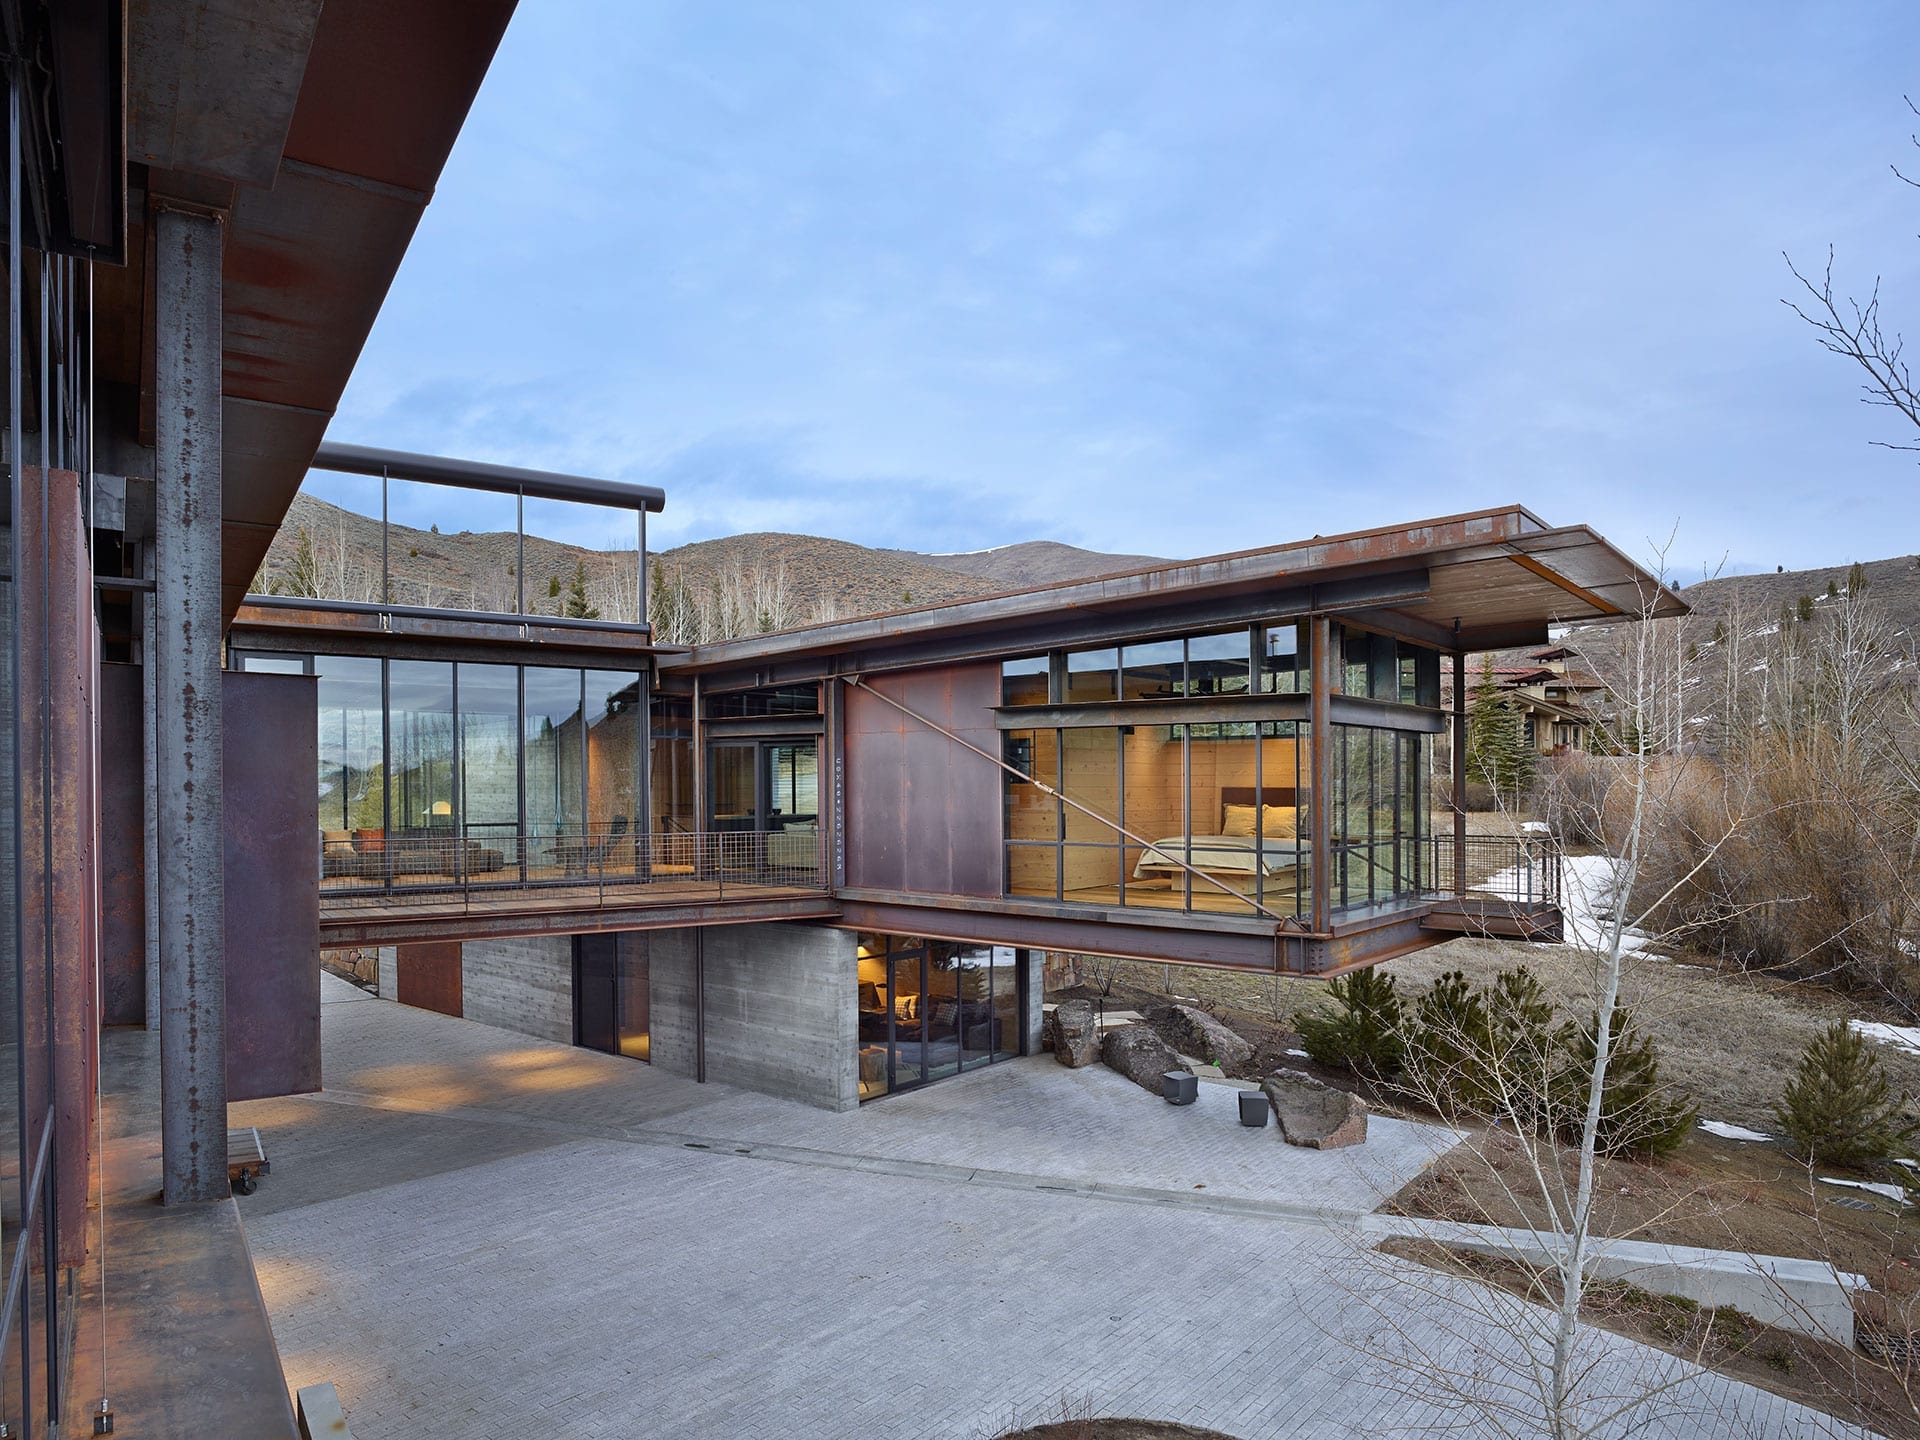 Modern mountain home with steel windows cantilevered living areas